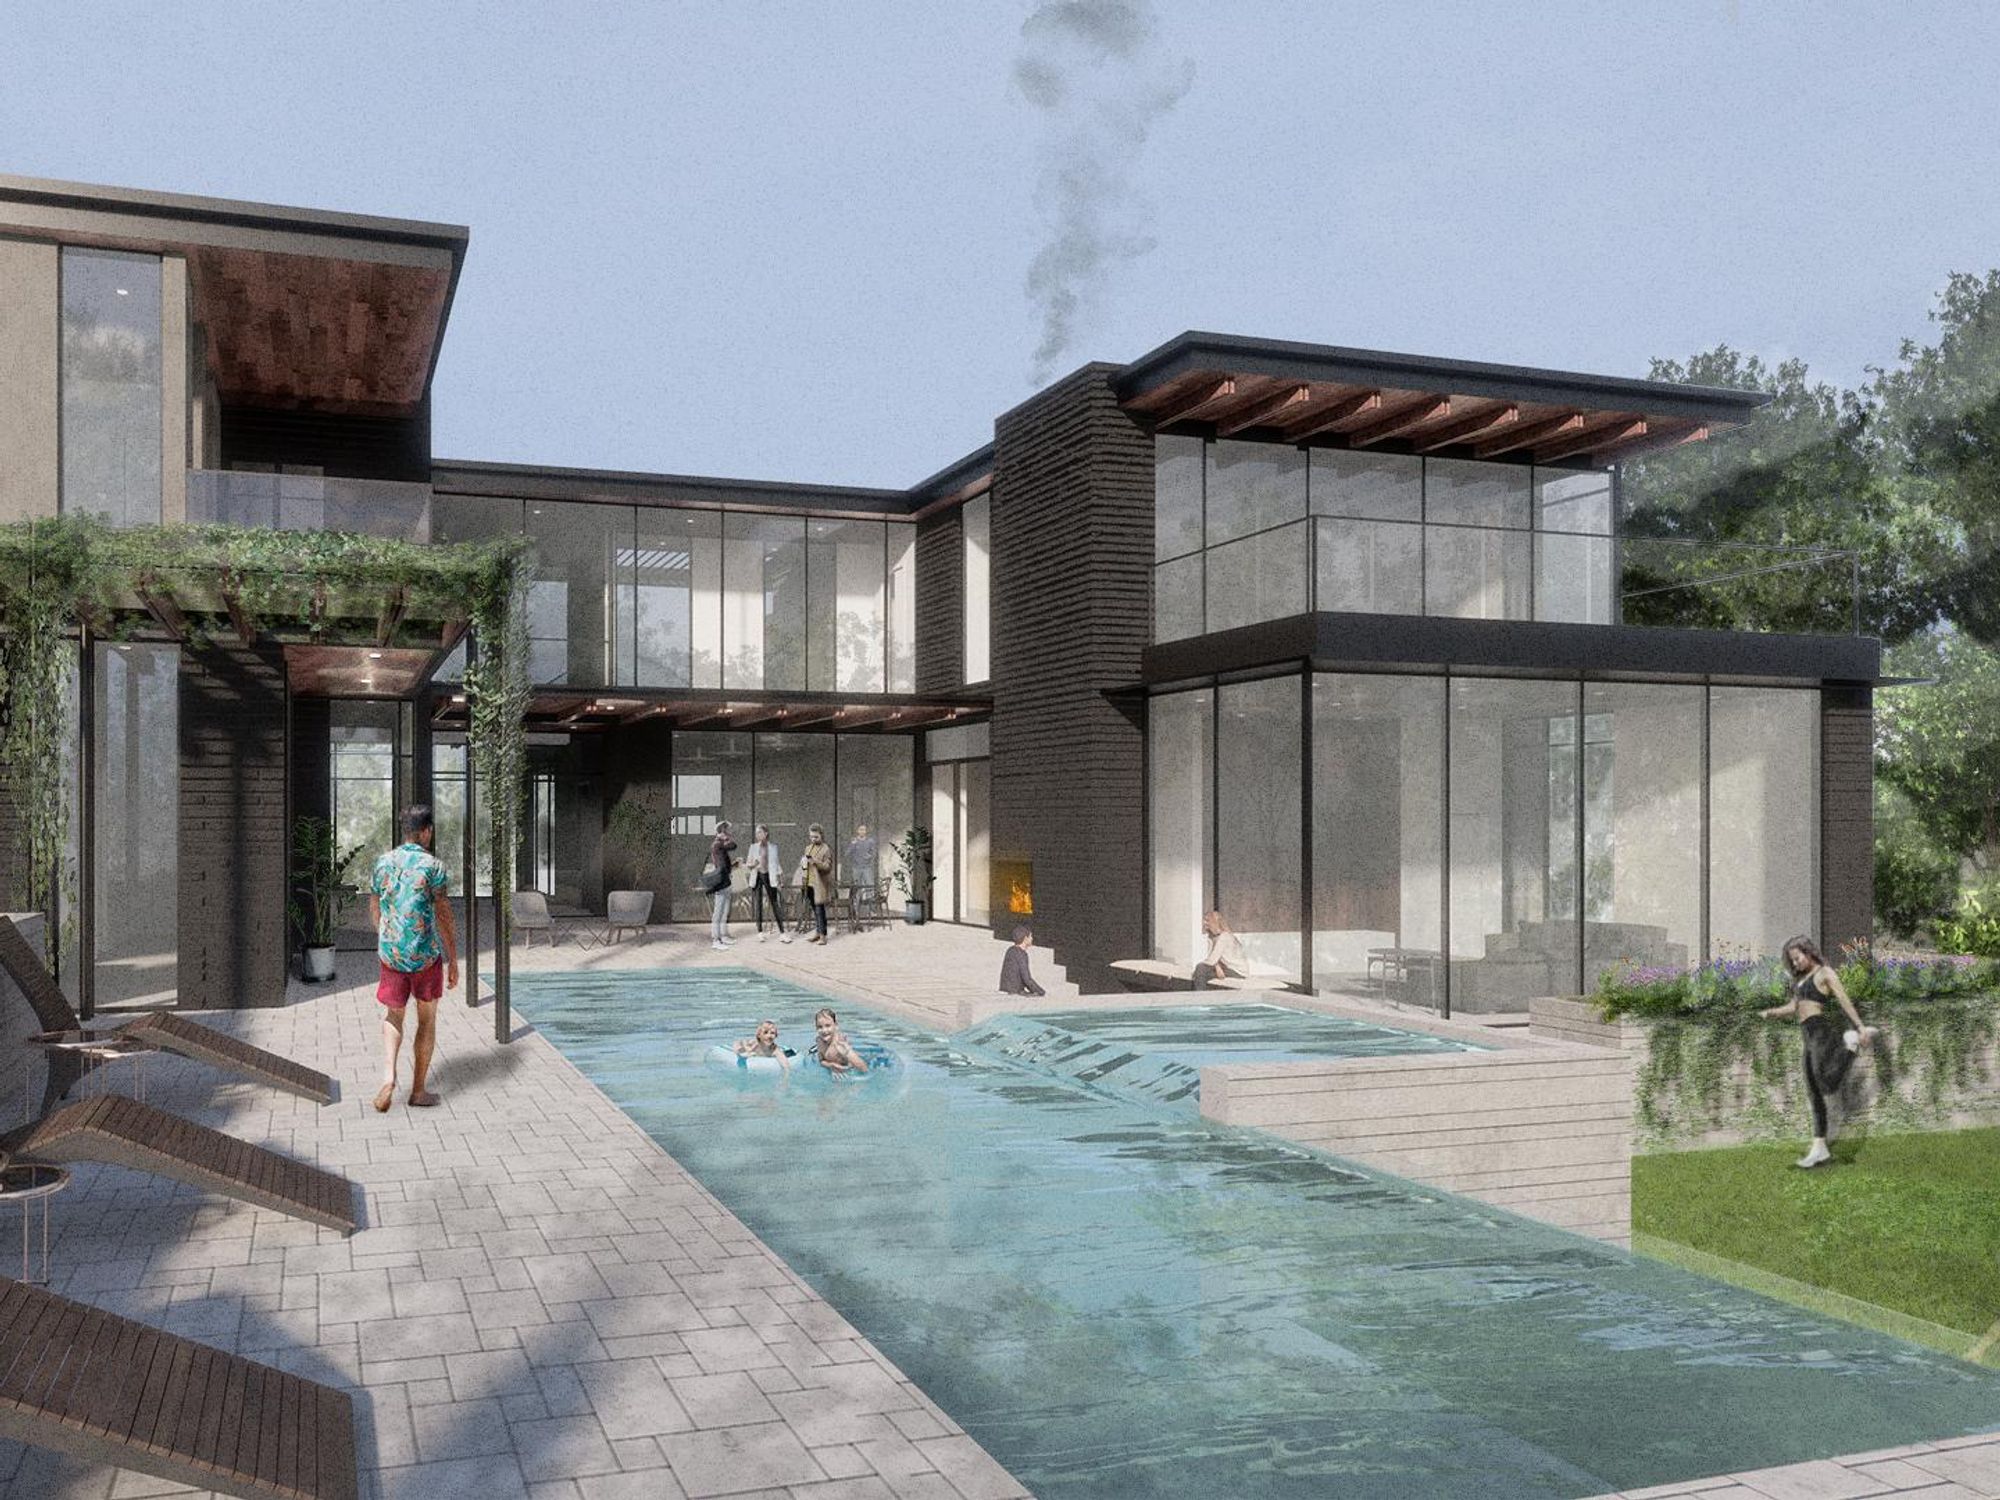 A new high-priced development is coming to West Lake Hills. Courtesy rendering, Kuper Sotheby's